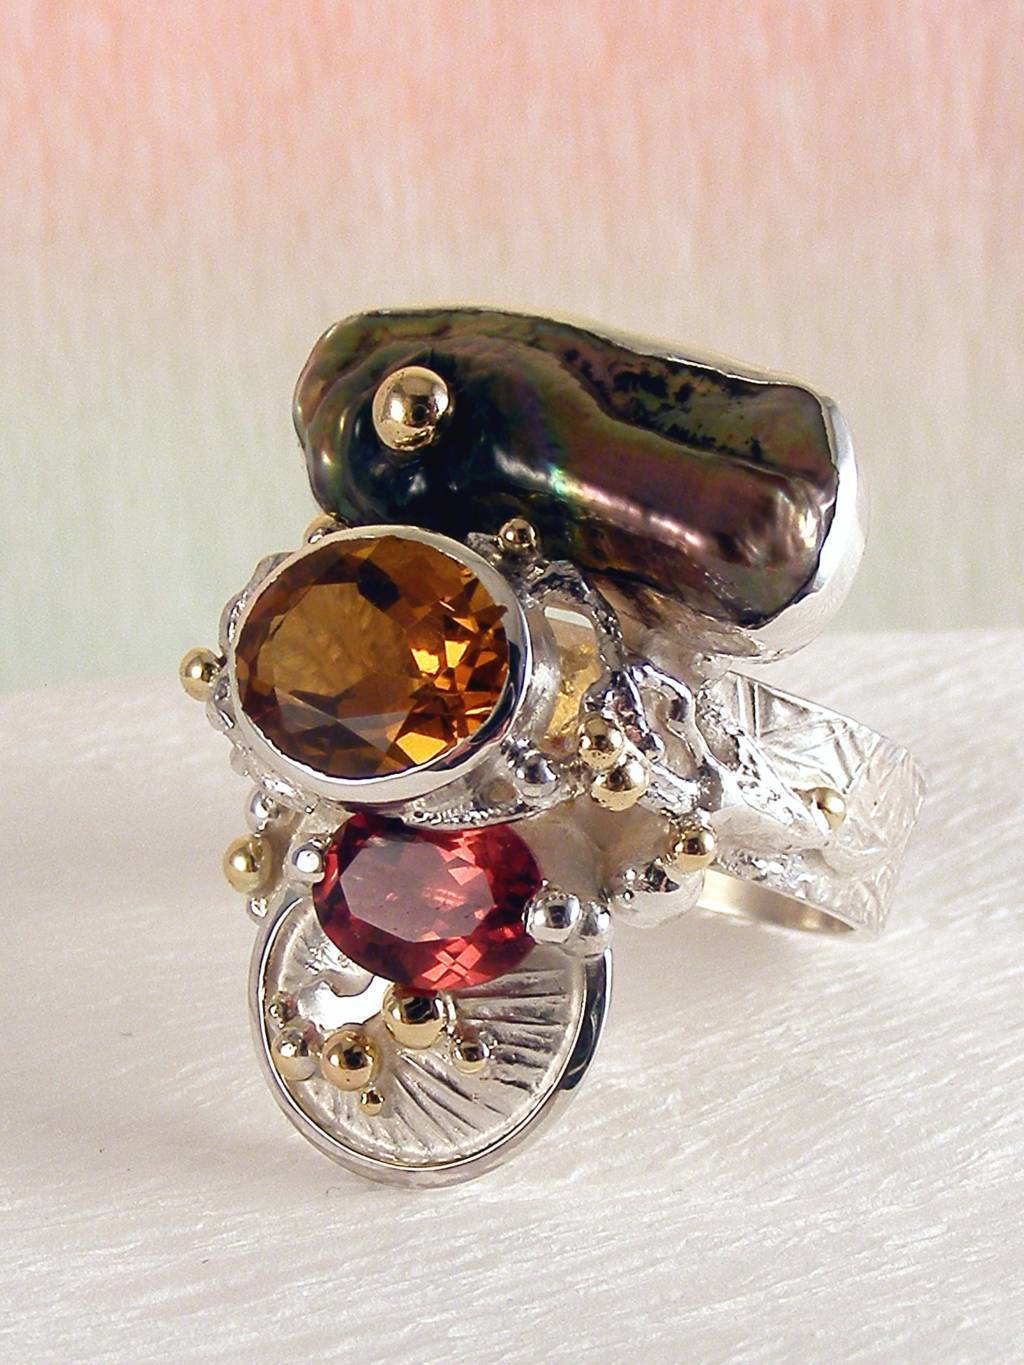 original maker's handcrafted jewellery, gregory pyra piro ring 3292, mixed metal jewelry, 14k gold and silver, sterling silver and 14 karat gold, artist with own style, unique style jewelry, silver and gemstone jewelry, gemstone and pearl jewelry, gold and color gemstone jewelry, citrine, garnet, pearl, art nouveau inspired fashion jewelry, jewellery with natural pearls and semi precious stones, contemporary jewelry from silver and gold, art jewellery with colour stones, contemporary jewelry with pearls and color stones, jewellery made from silver and gold with natural pearls and natural gemstones, shopping for diamonds and designer jewellery, accessories with color stones and pearls, artisan handcrafted jewellery with natural gemstones and natural pearls, jewelry made first hand, art and craft gallery artisan handcrafted jewellery for sale, jewellery with ocean and seashell theme